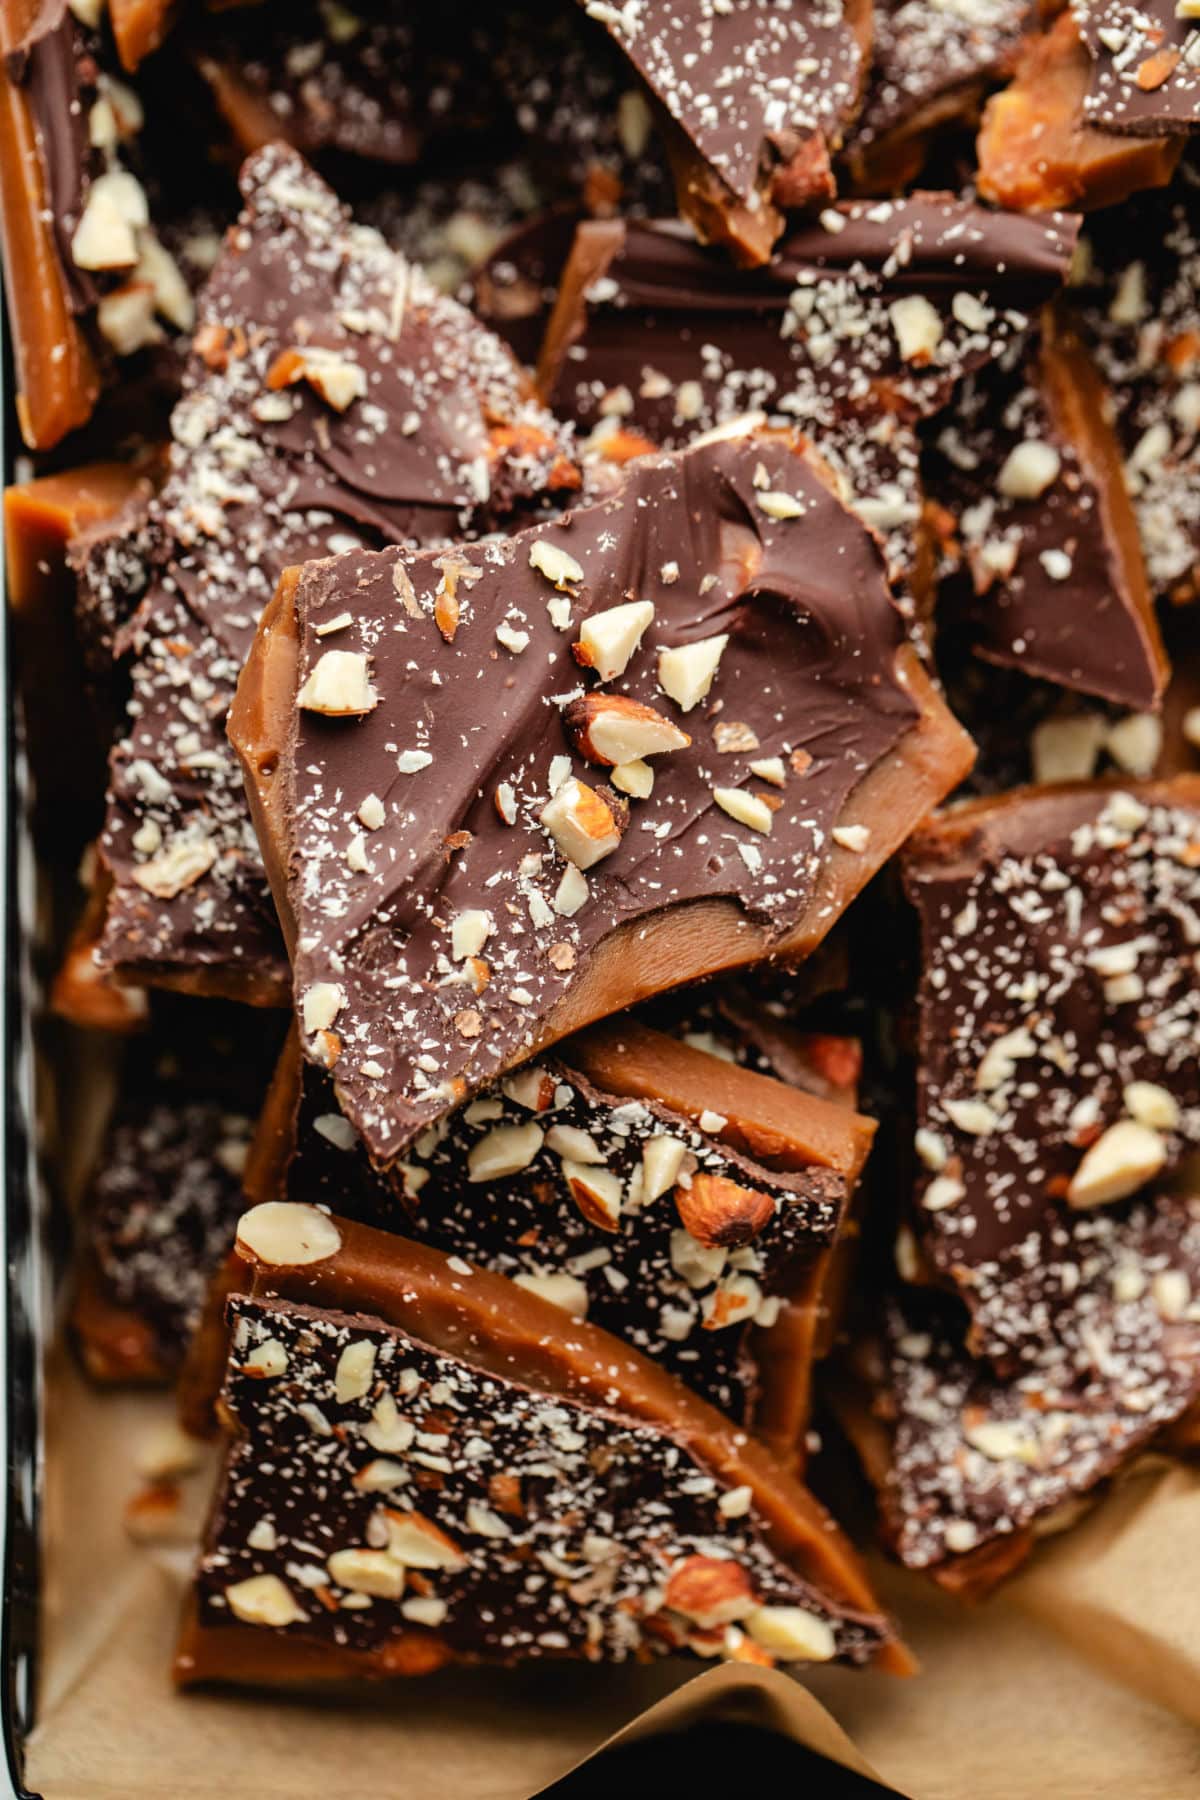 Homemade toffee topped with chocolate and chopped almonds.